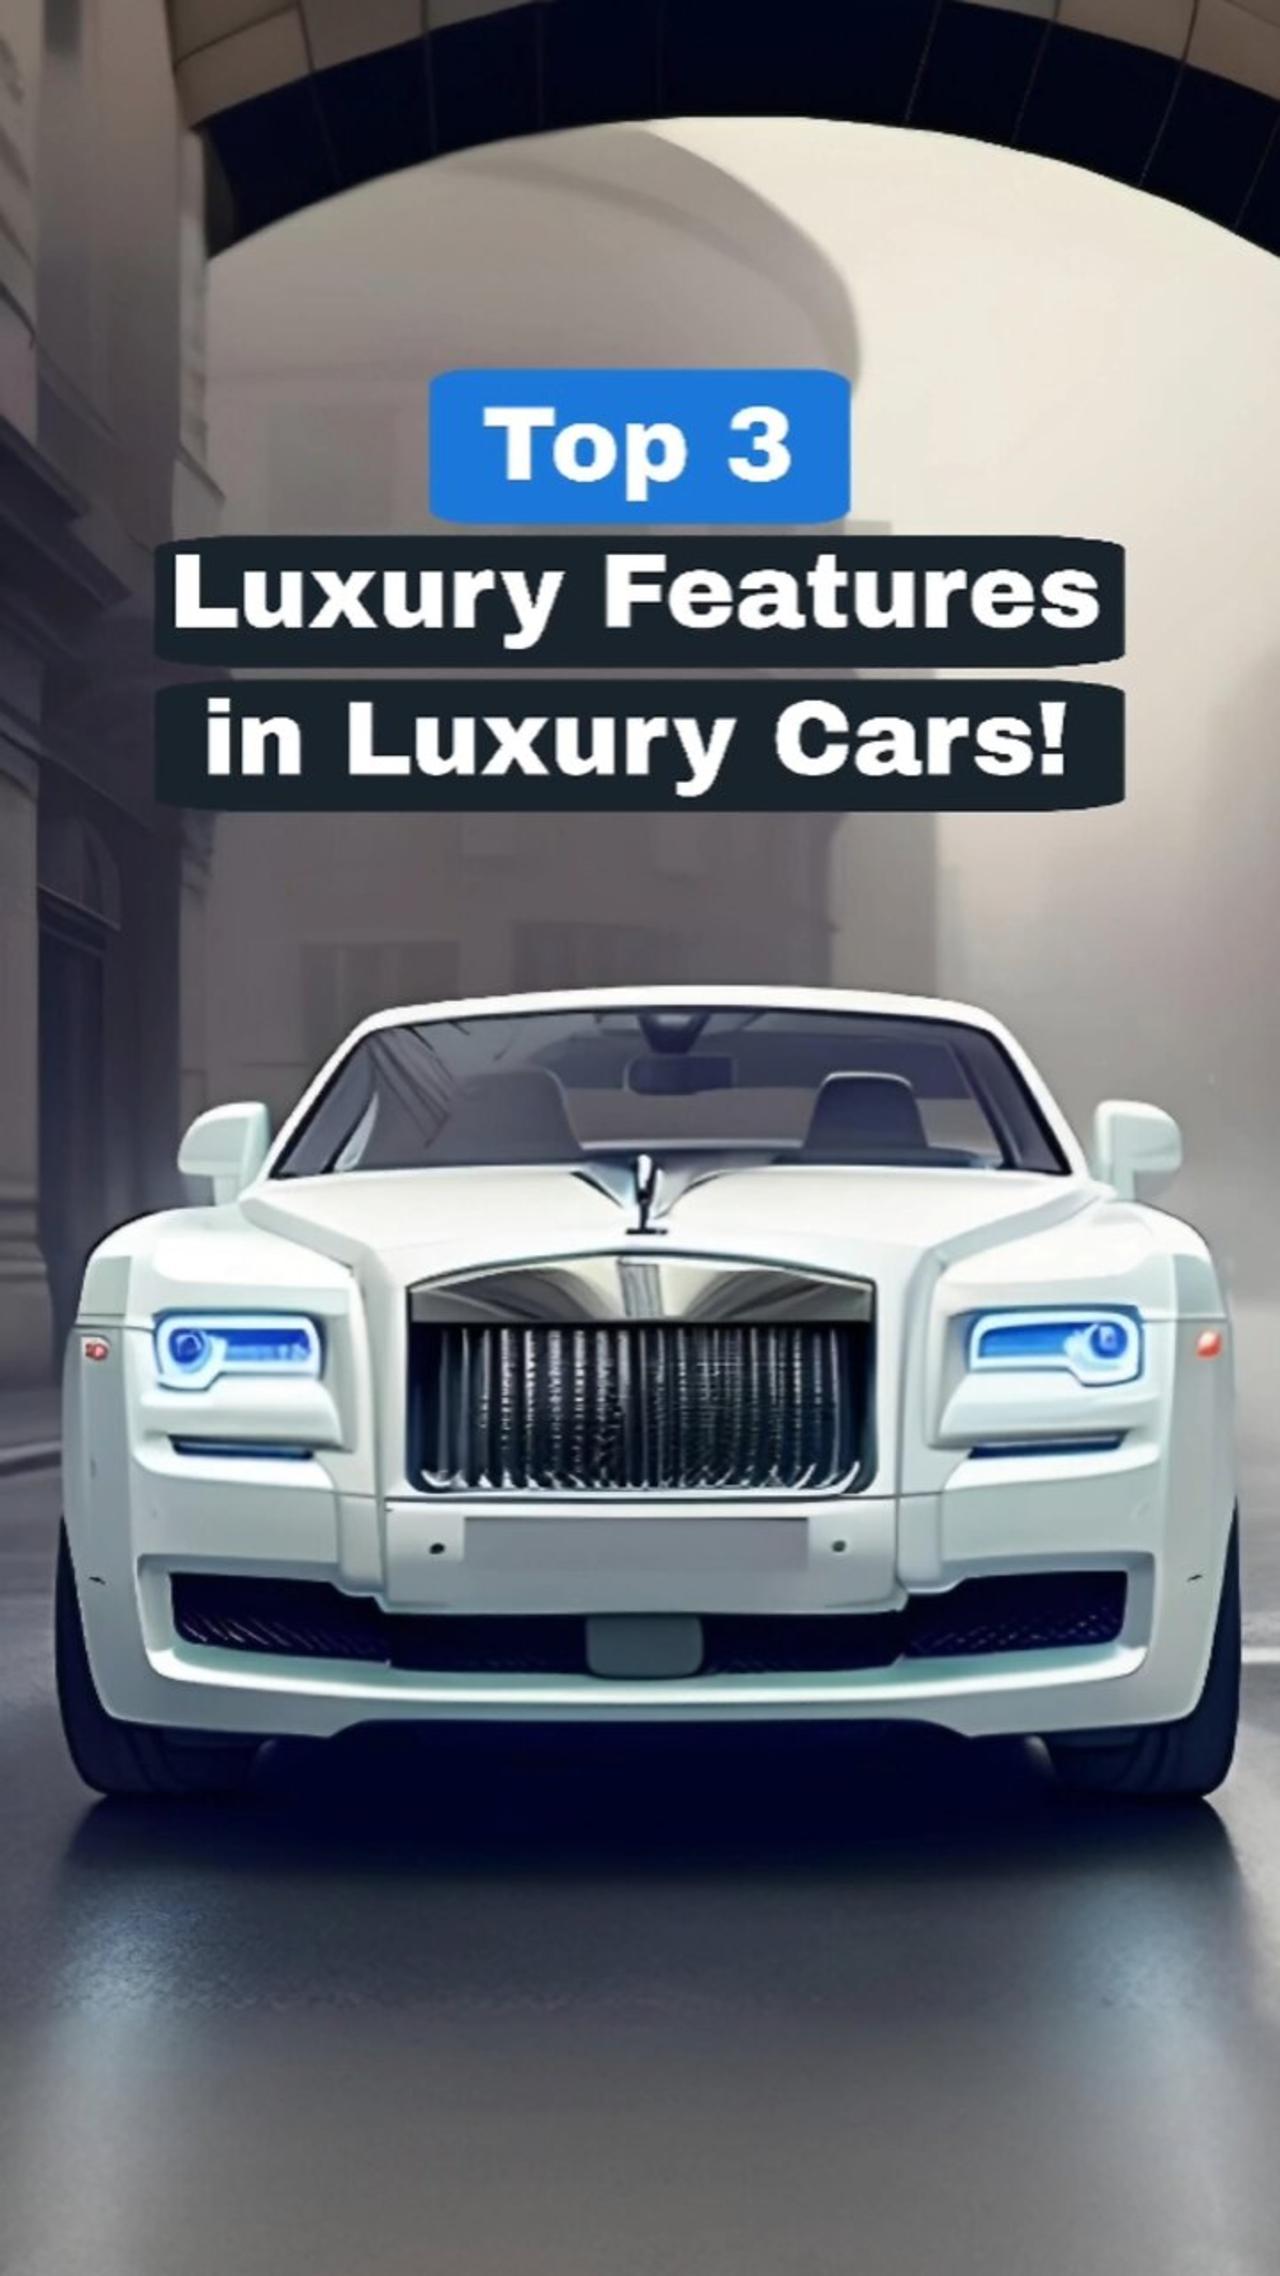 Top 3 Luxury Features in Luxury Cars!